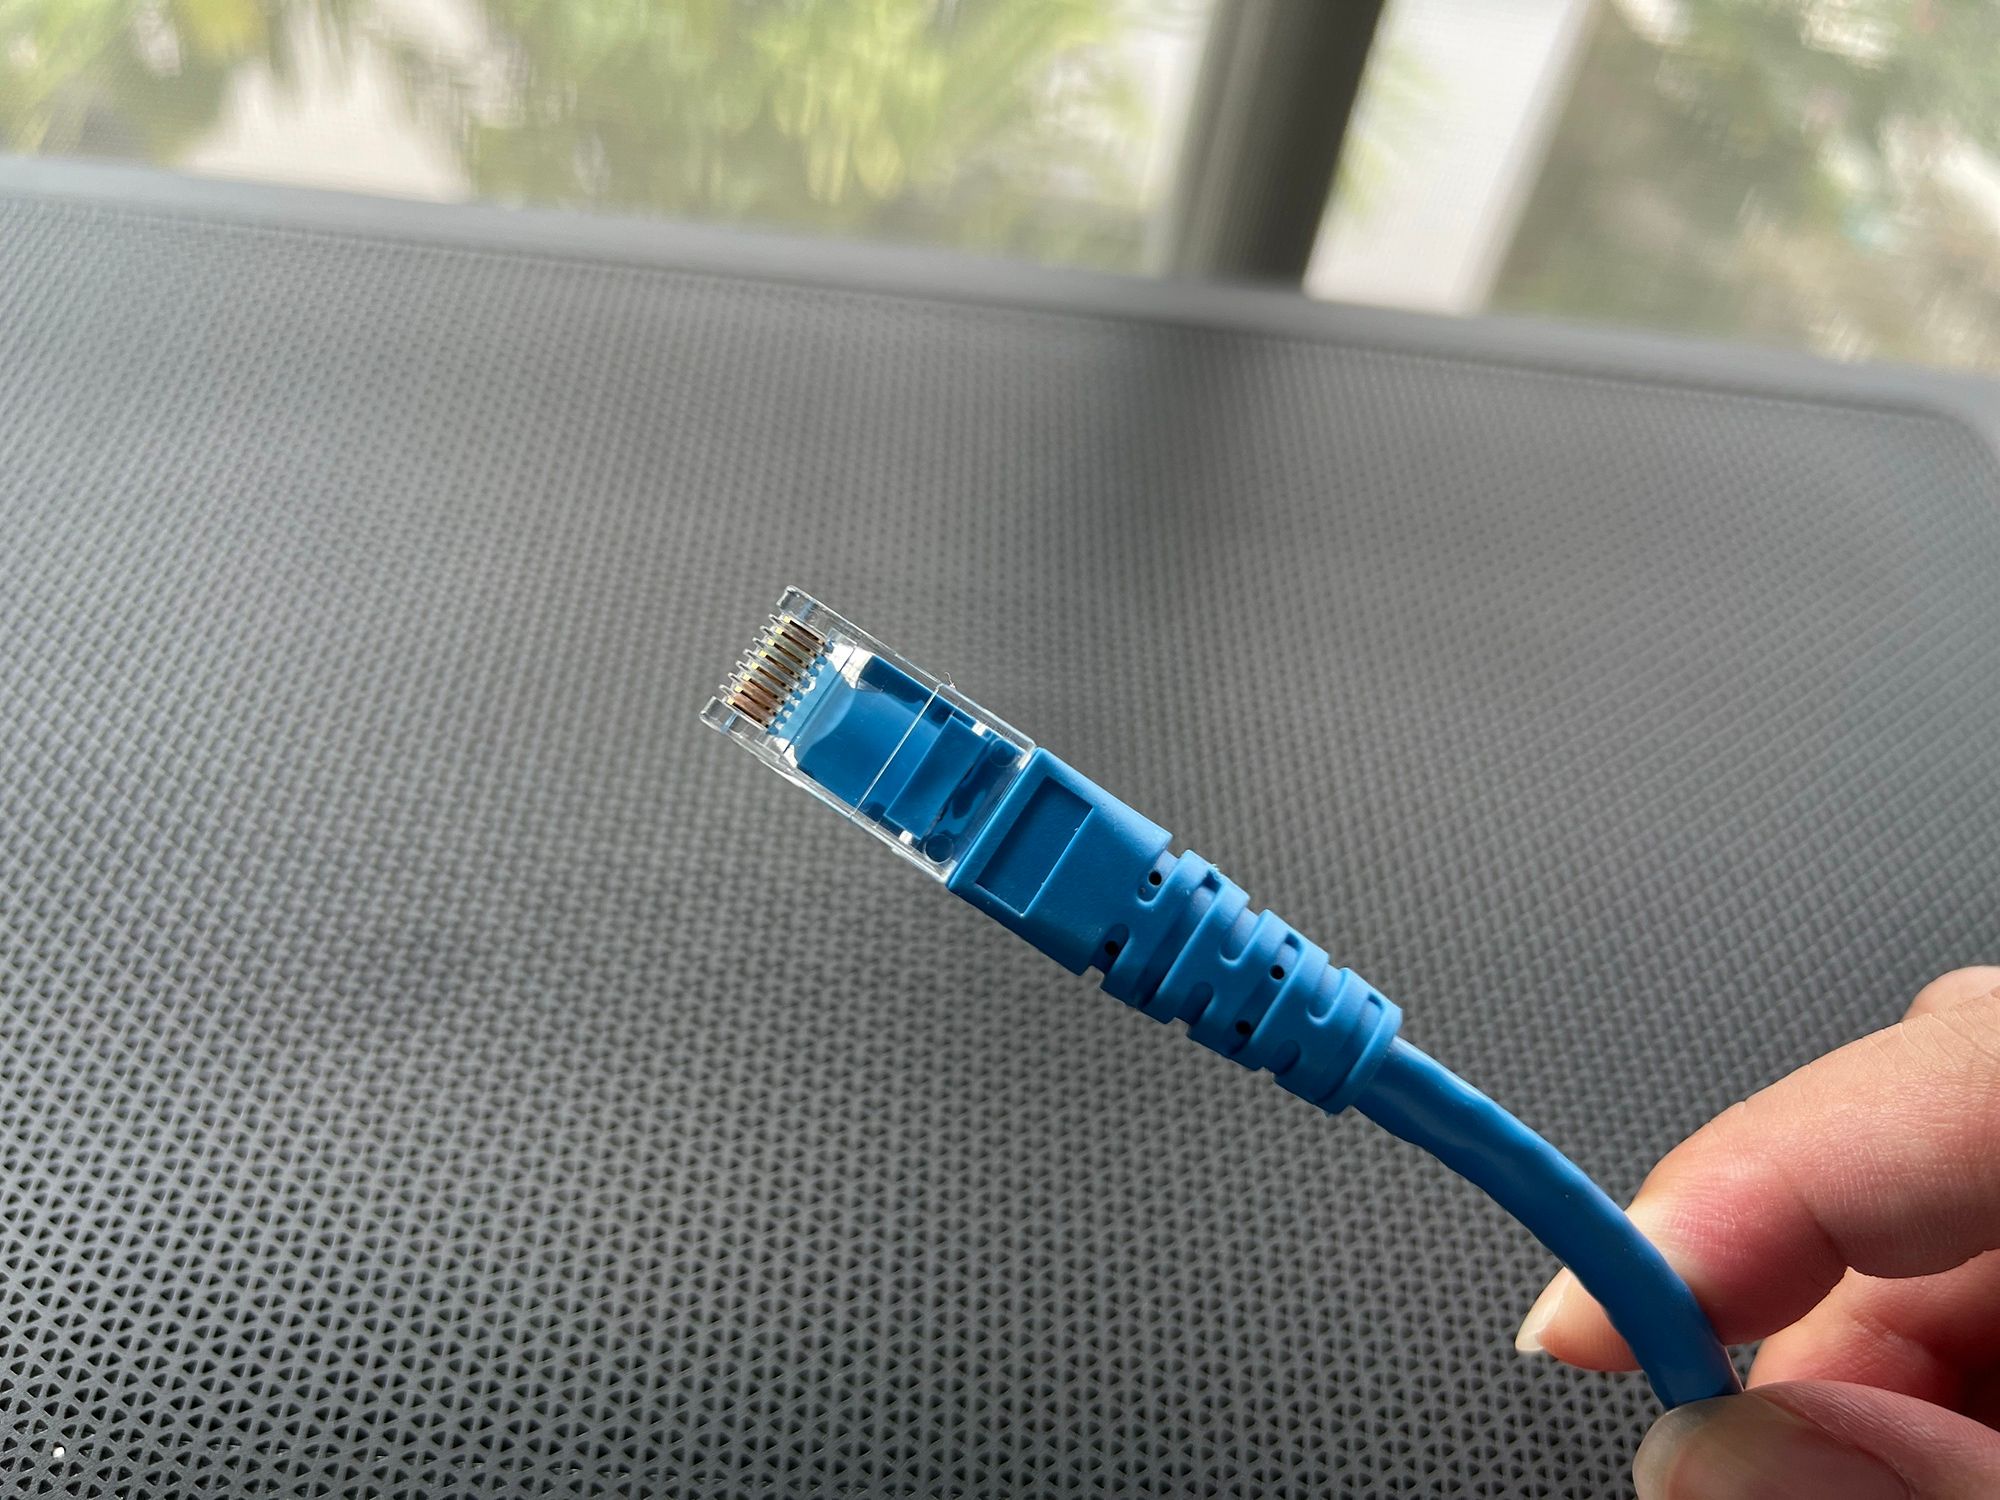 UTP Cable